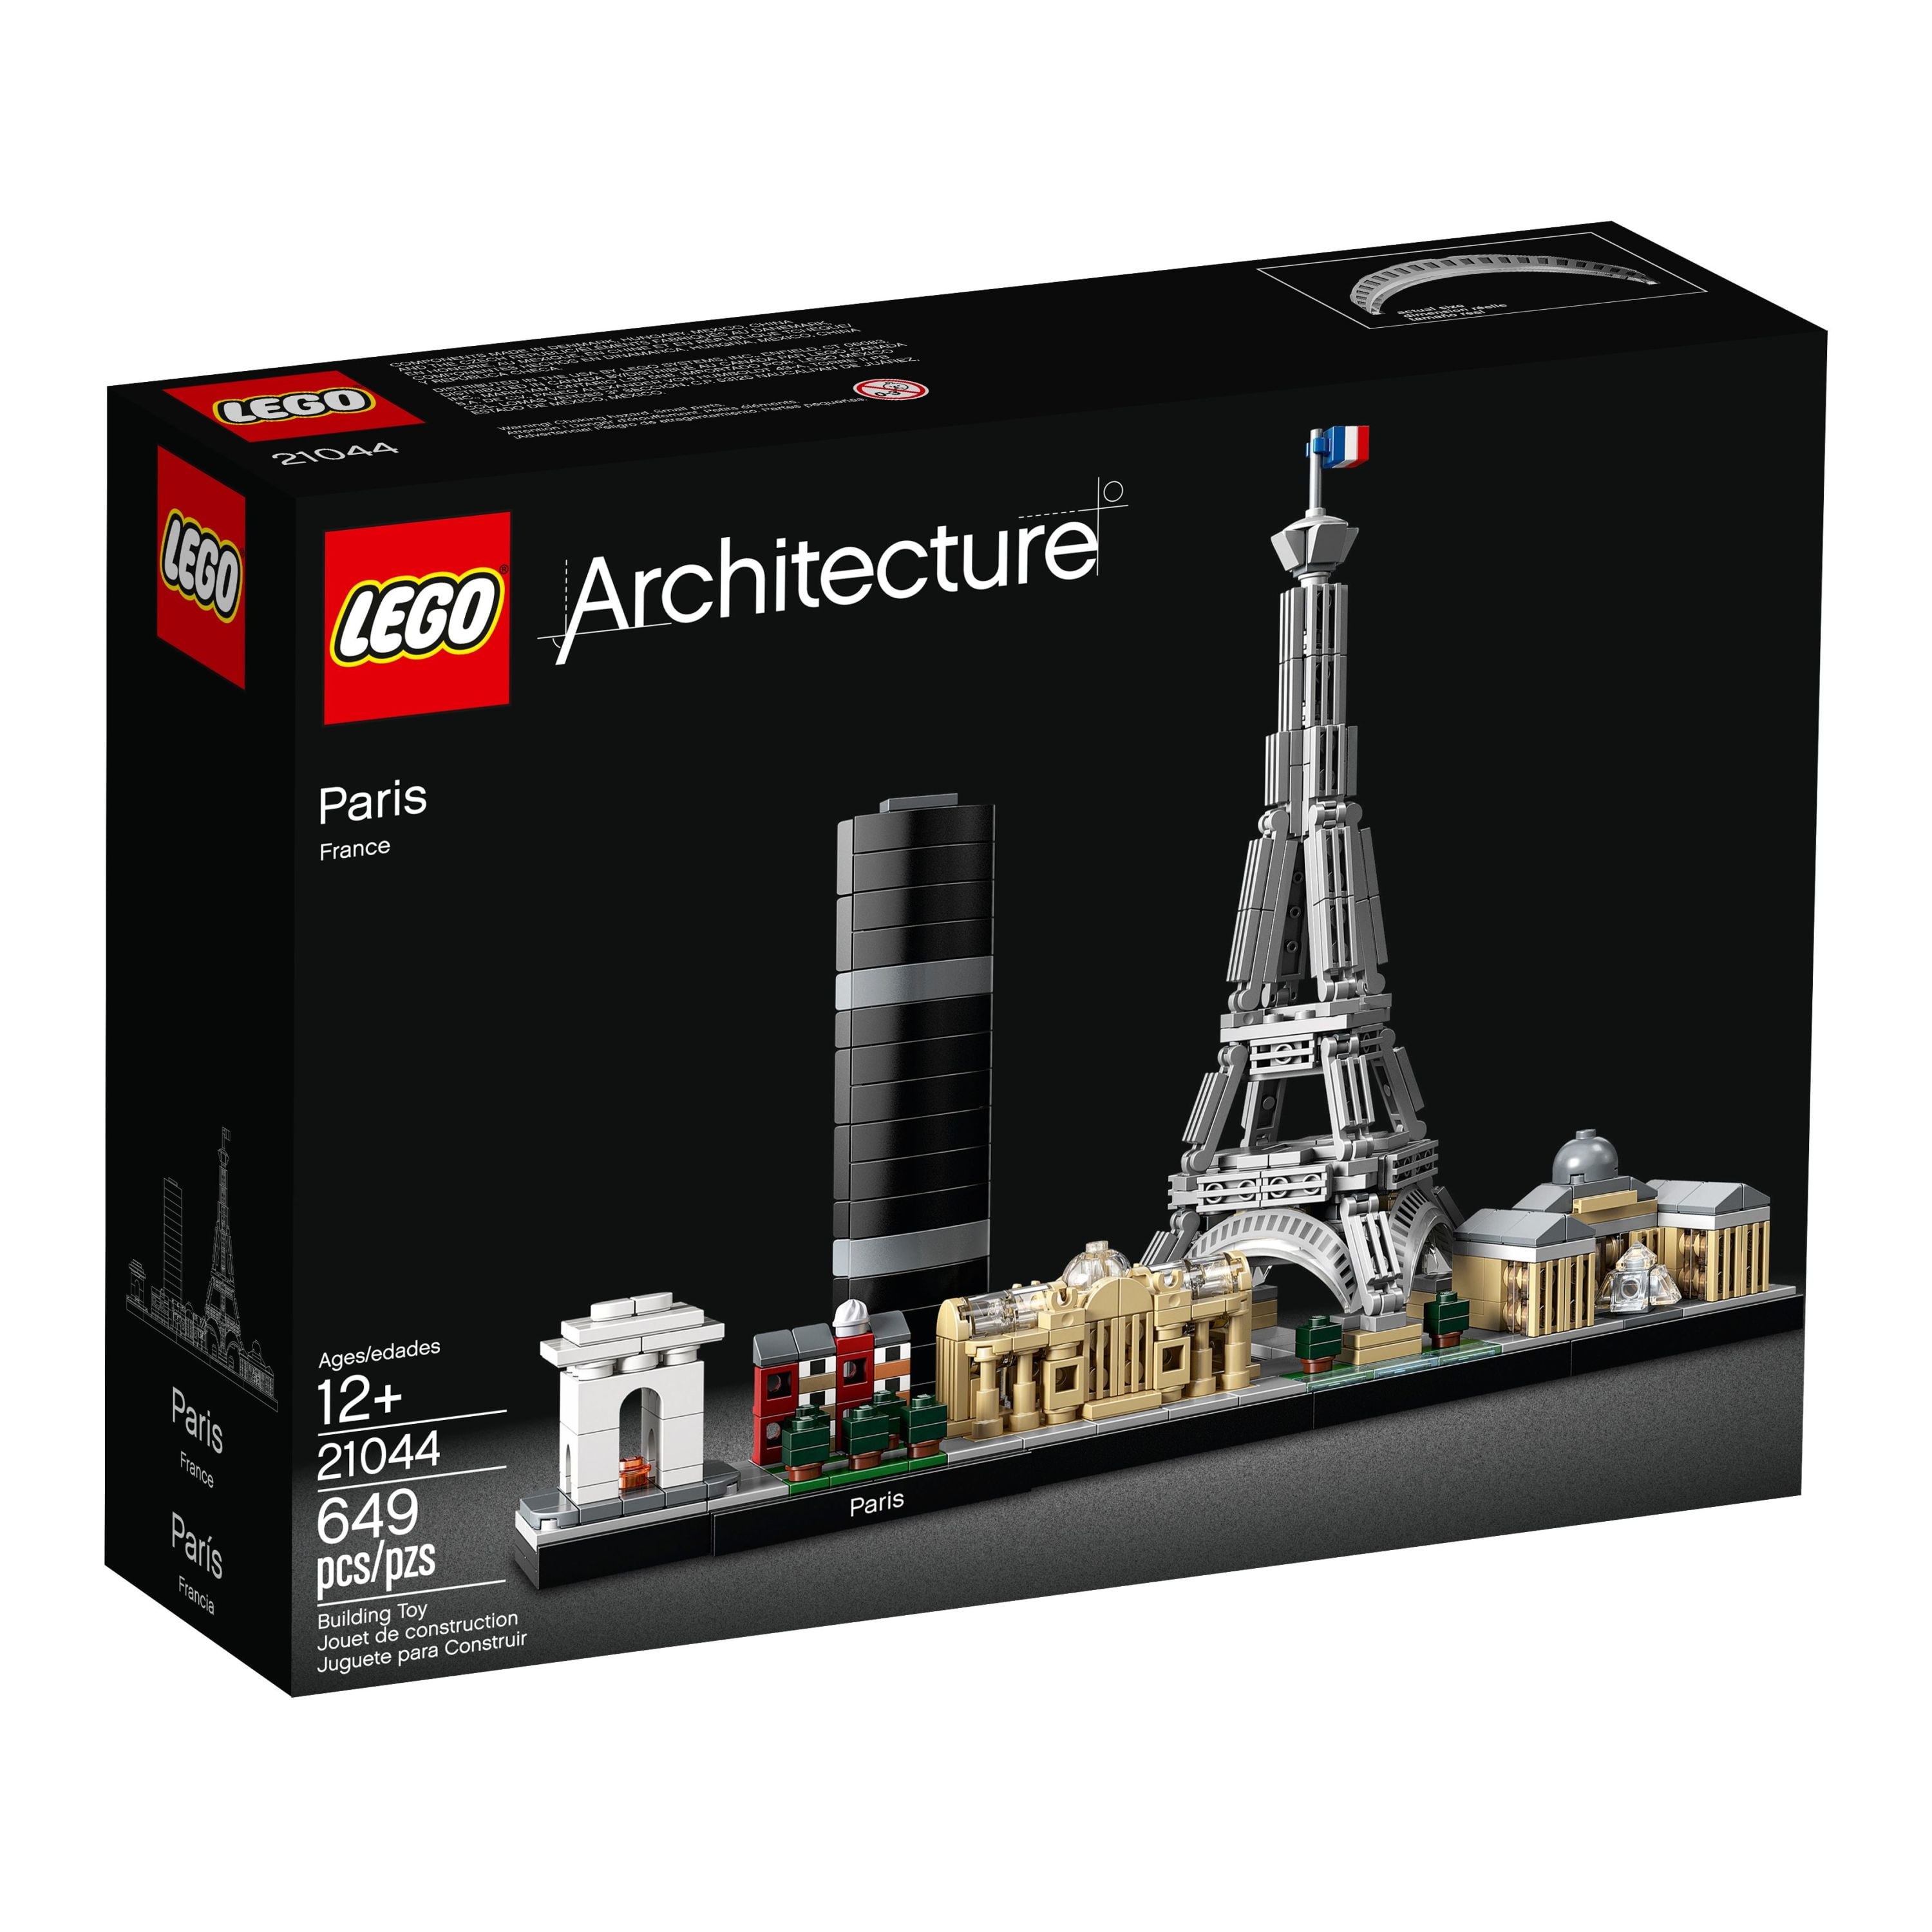 LEGO Architecture Paris Skyline 21044 Collectible Model Building Kit with Eiffel Tower and The Louvre, Skyline Collection -